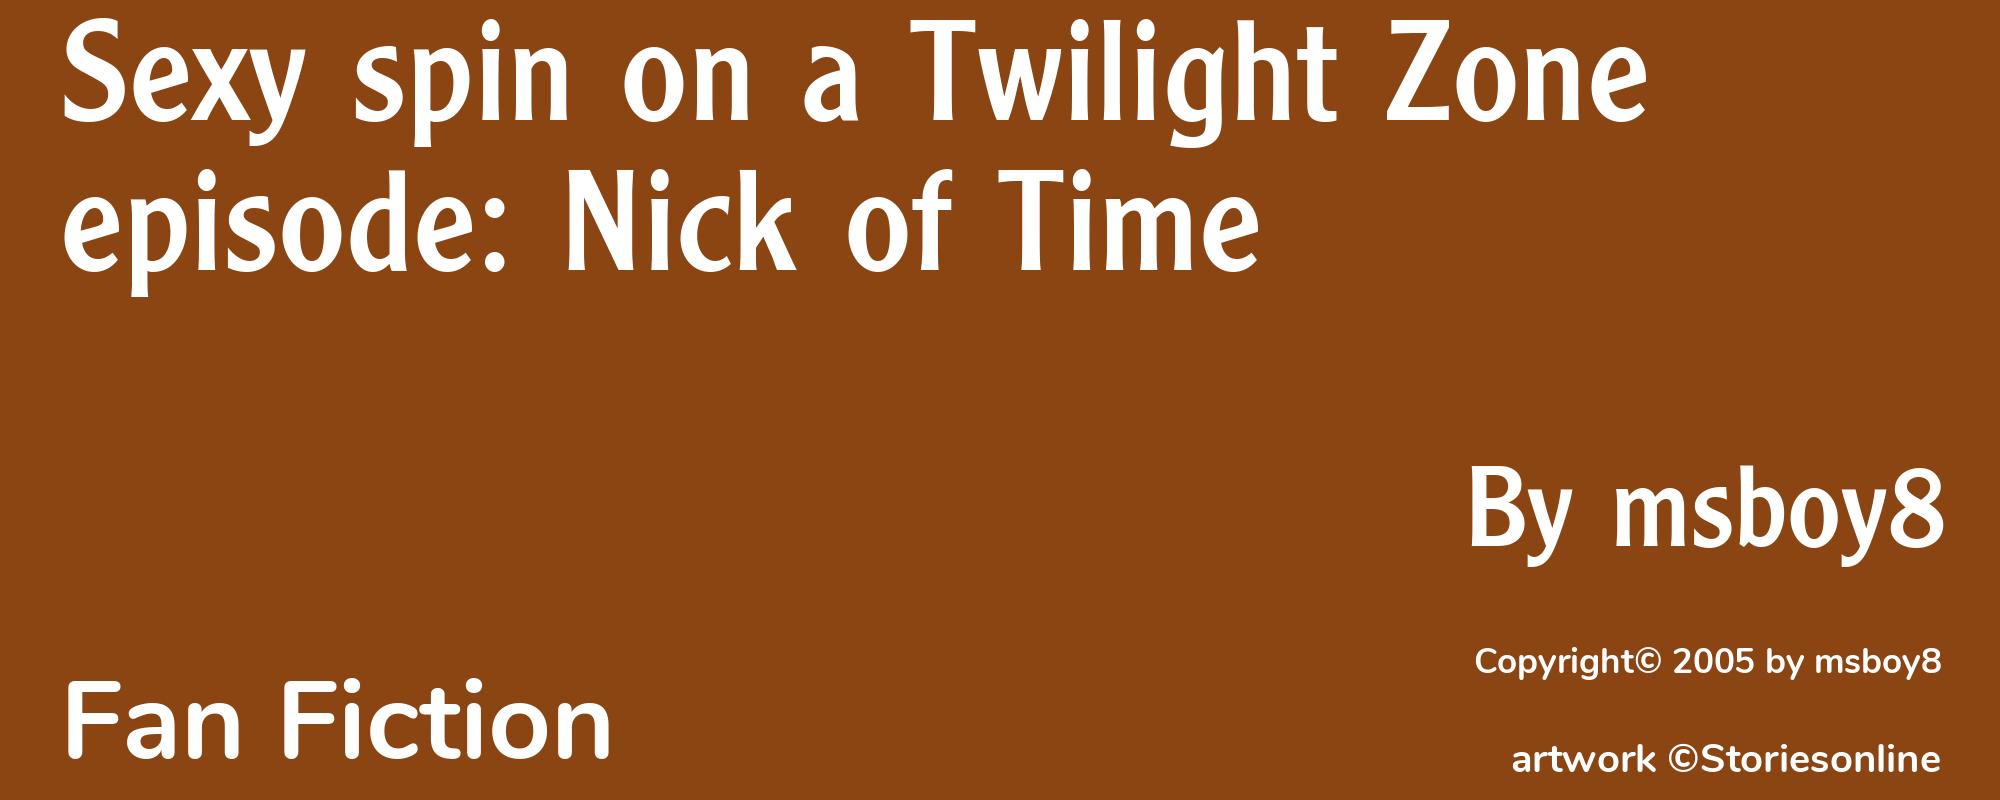 Sexy spin on a Twilight Zone episode: Nick of Time - Cover